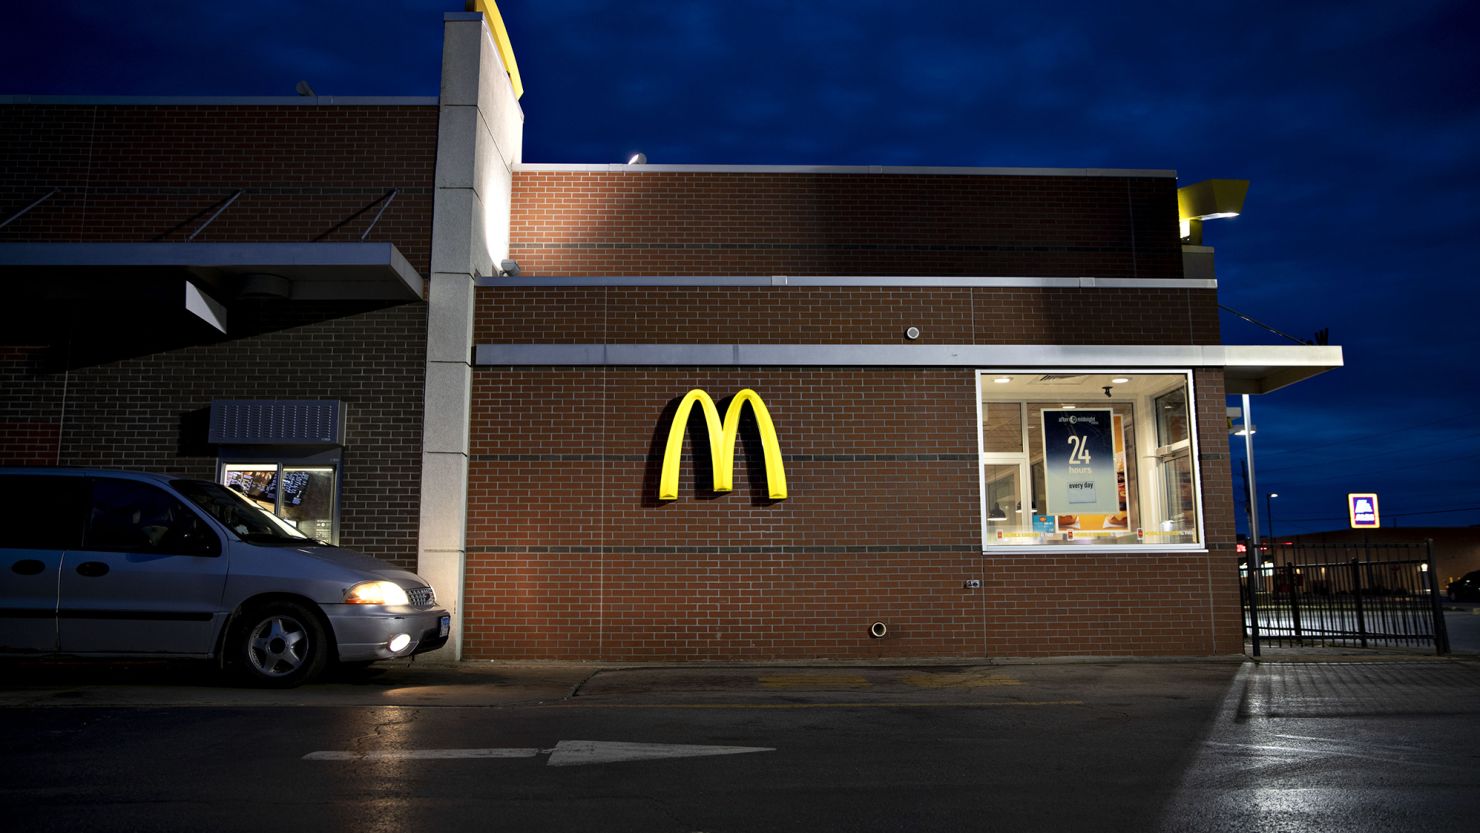 A vehicle sits in the drive-thru of a McDonald's Corp. restaurant in Peru, Illinois, U.S., on Wednesday, March 27, 2019. McDonald's, in its largest acquisition in 20 years, is buying a decision-logic technology company to better personalize menus in its digital push. Photographer: Daniel Acker/Bloomberg via Getty Images